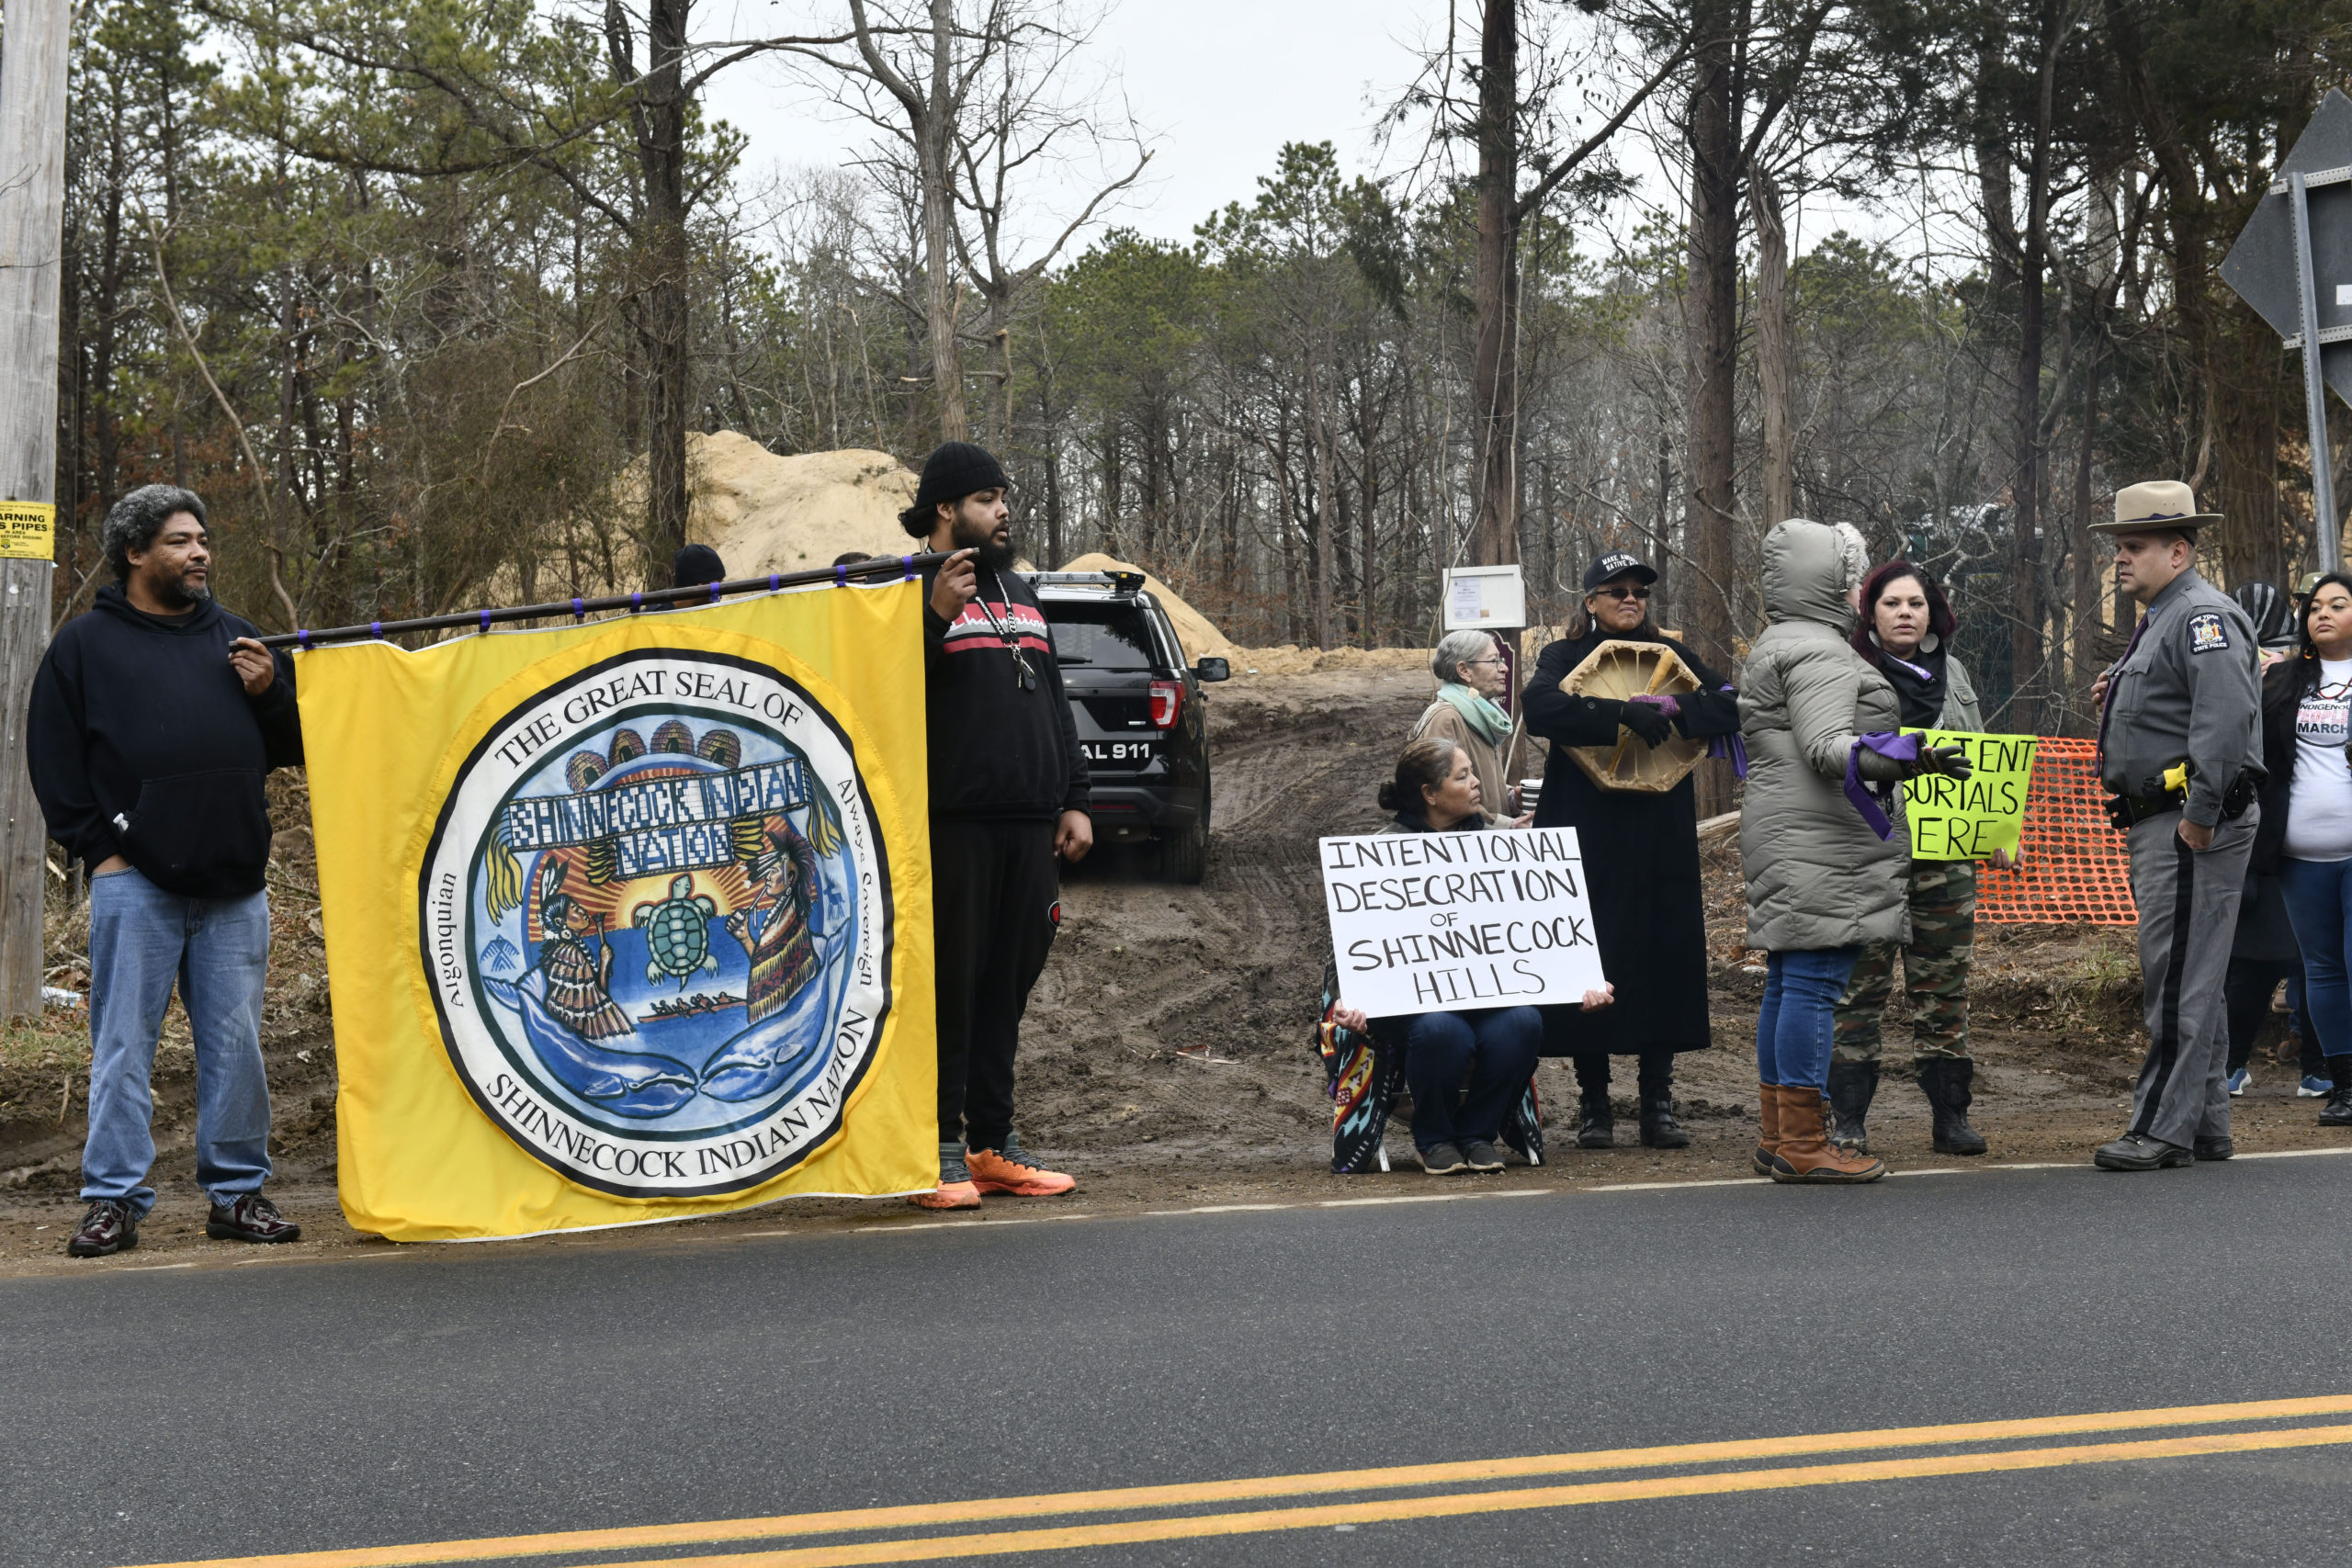 Memebers of the Shinnecock Nation prostest at the Sugar Loaf property in Shinnecock Hills on Tuesday, January 14.  DANA SHAW